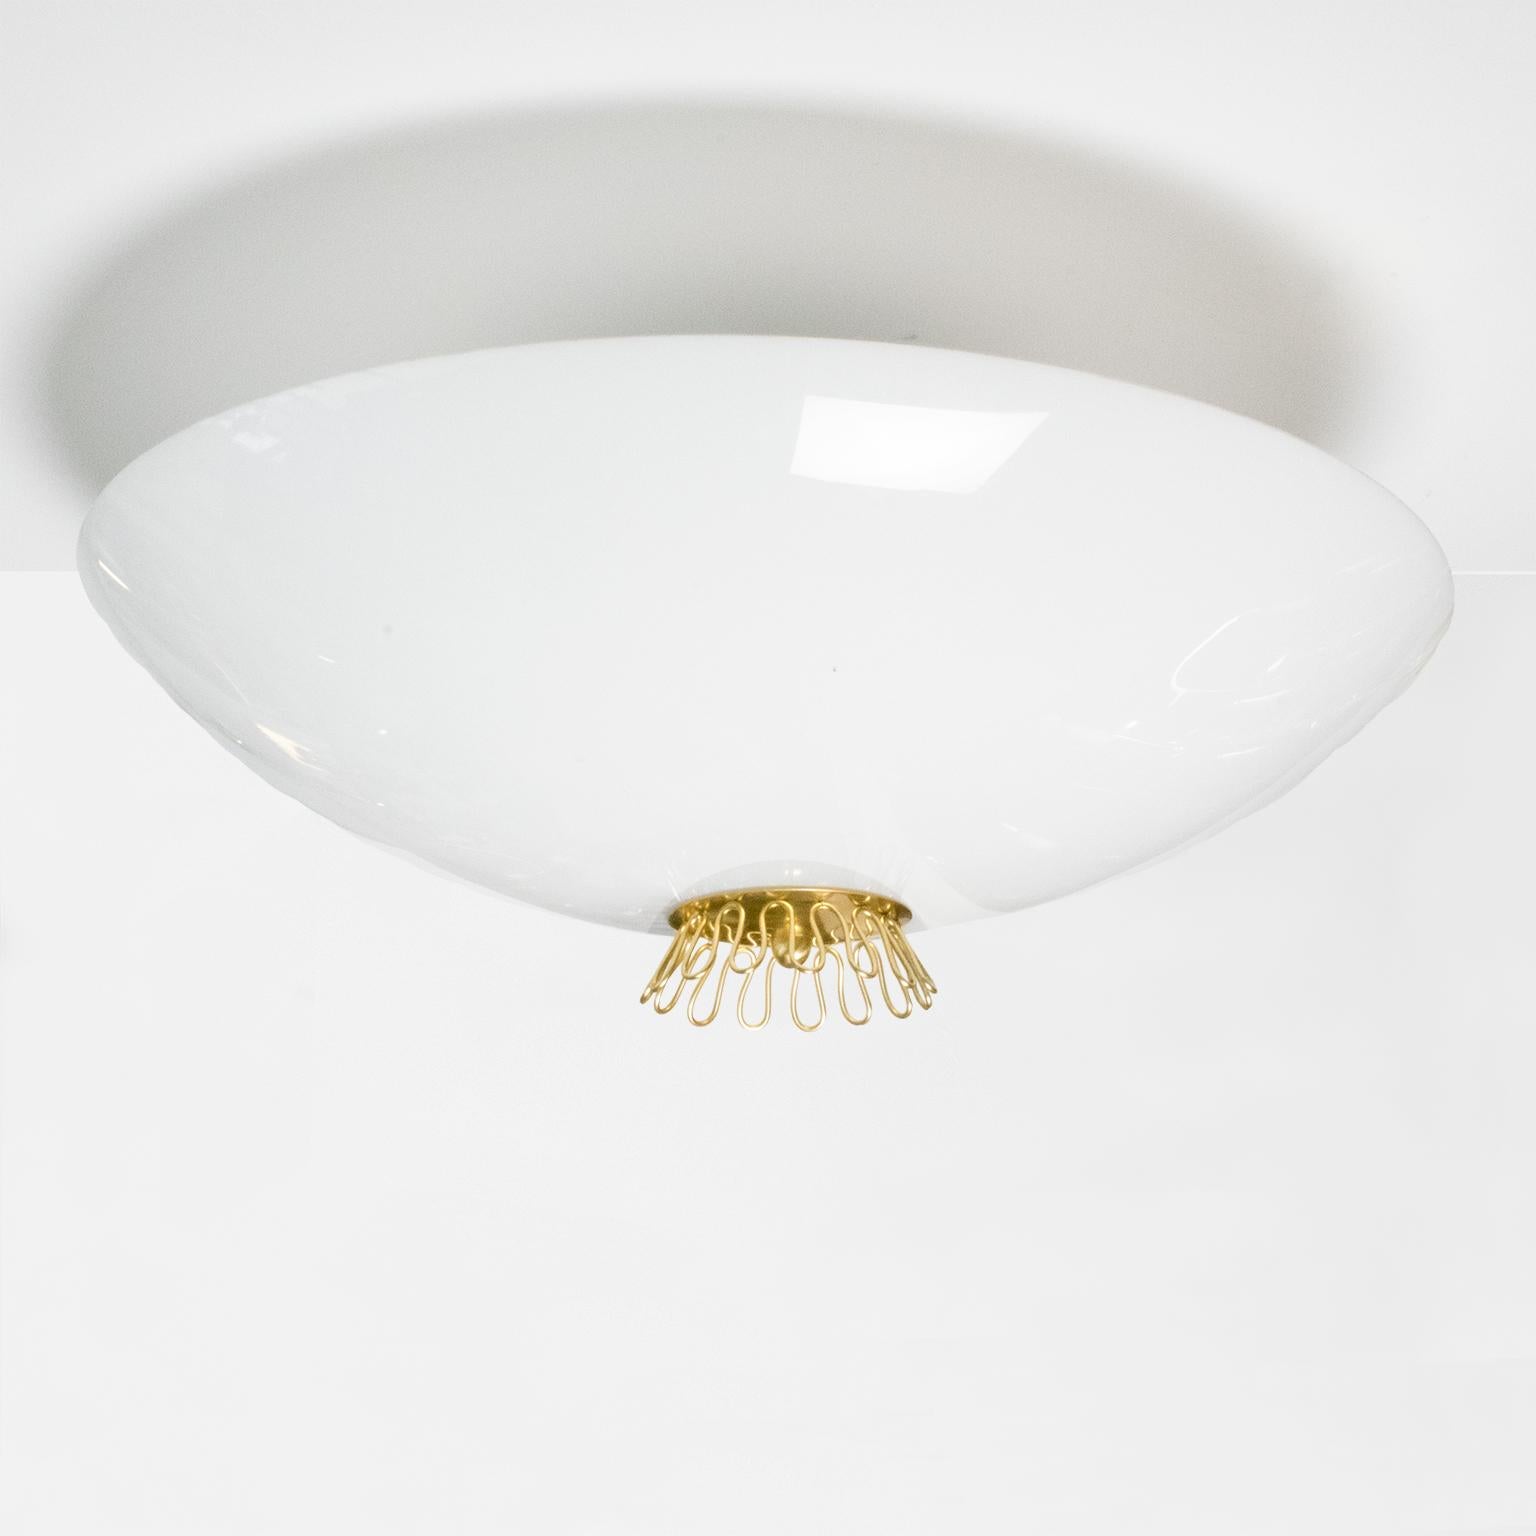 A large Scandinavian Modern Idman OY opal glass and brass flush-mount. The saucer shaped glass shade is detail with a decorate brass wire design mounted on a brass finial. Newly rewired with three standard base sockets for use in the USA. Mounting